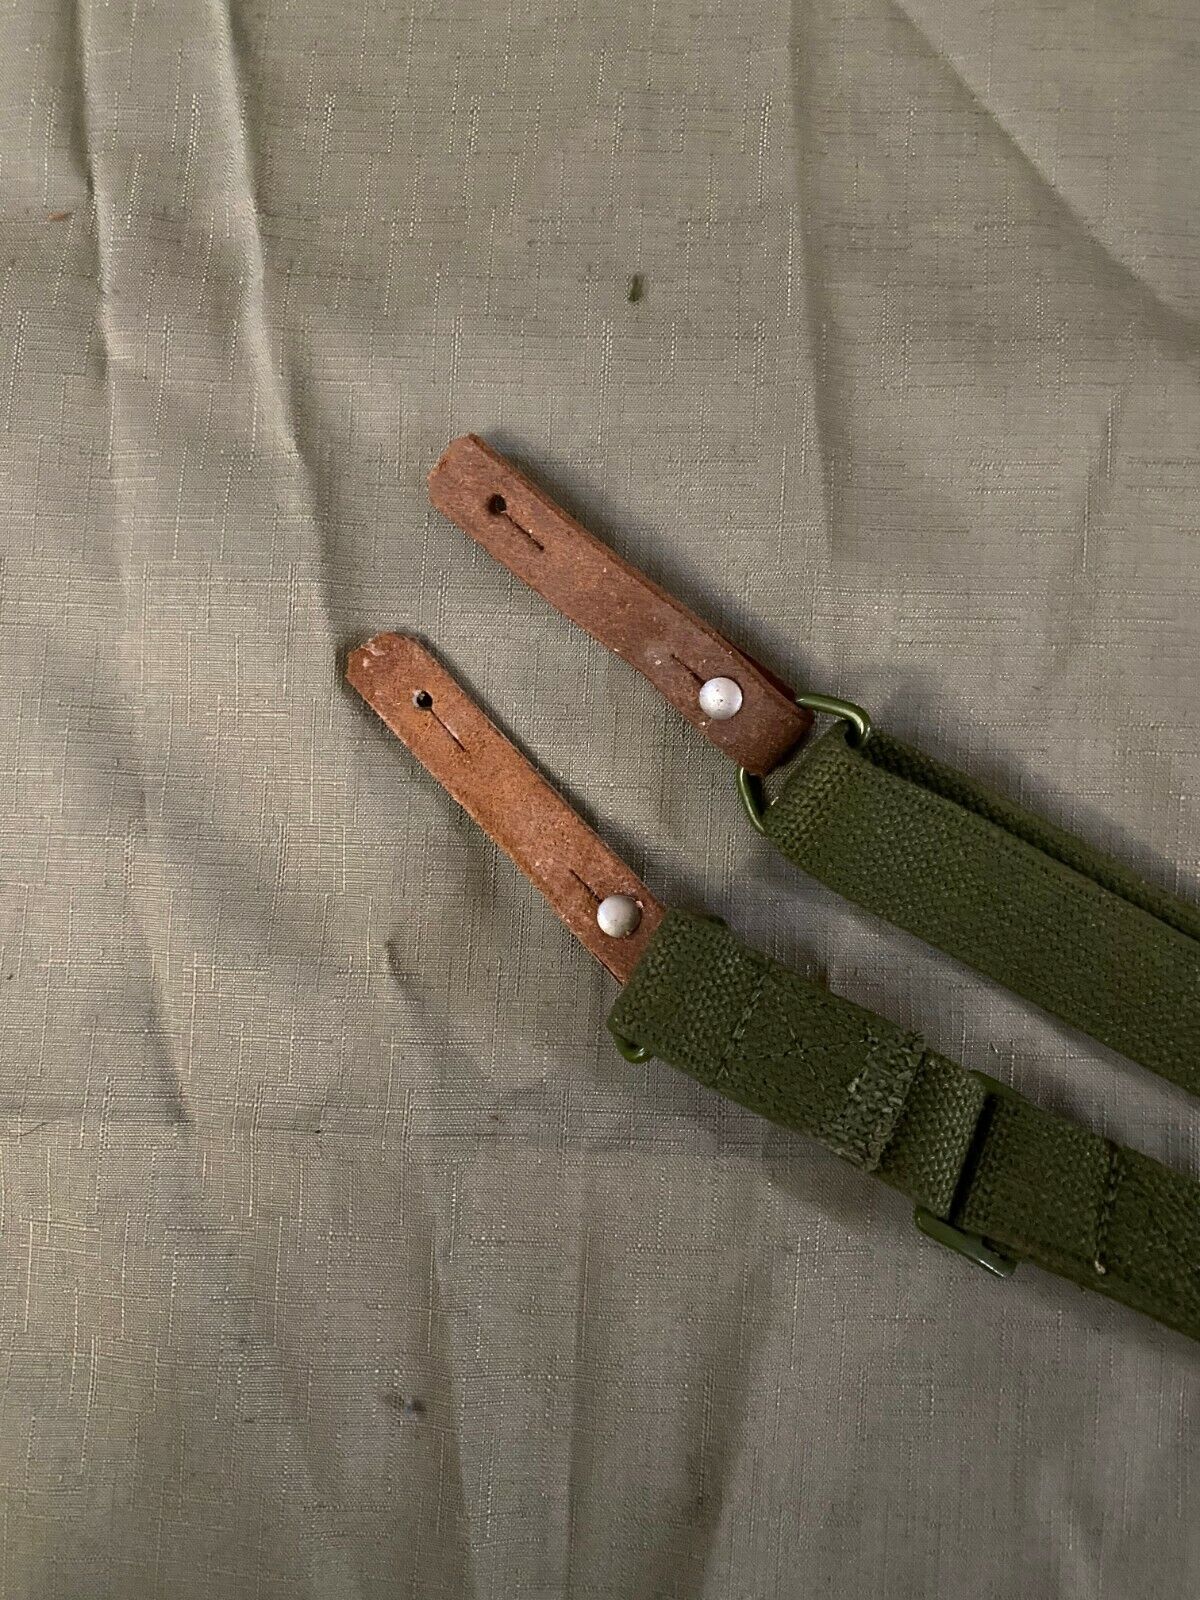 Leather Strip & Original Chinese Stamped 7.62 SKS Type 56 Rifle Canvas Sling